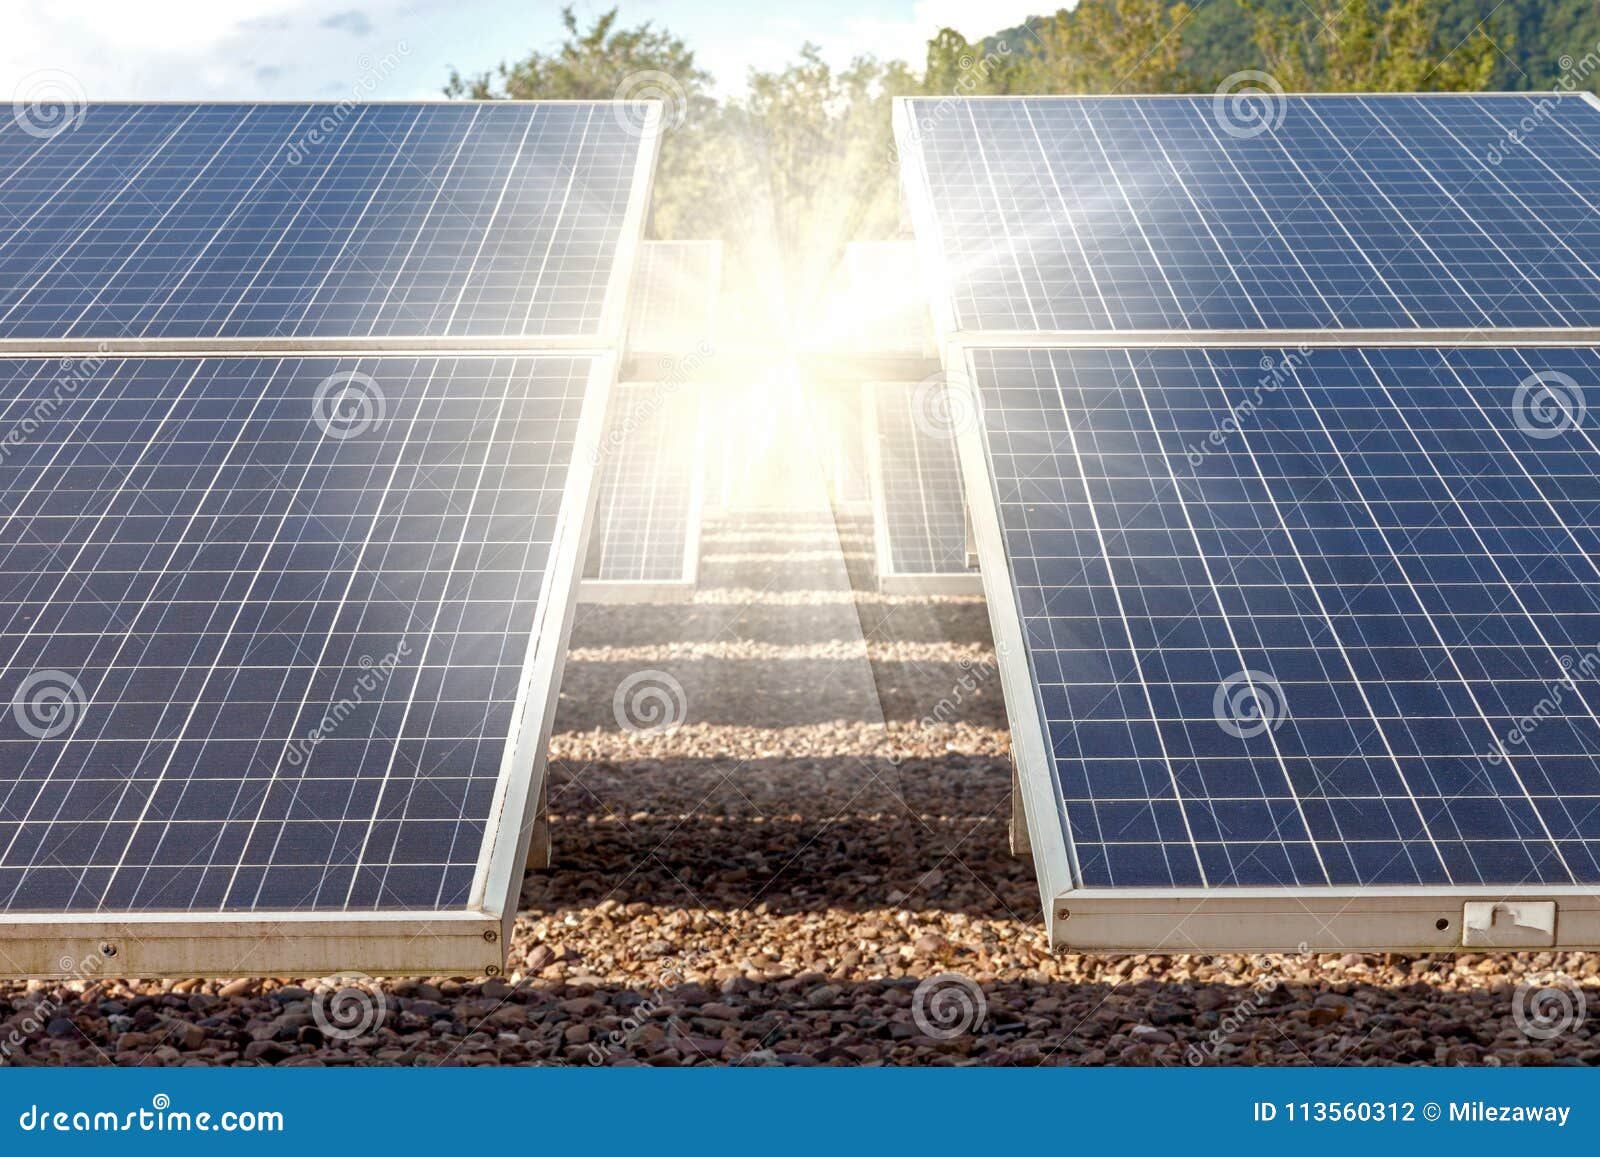 Solar Cell Panel With Strong Light Stock Photo Image of roof, green 113560312